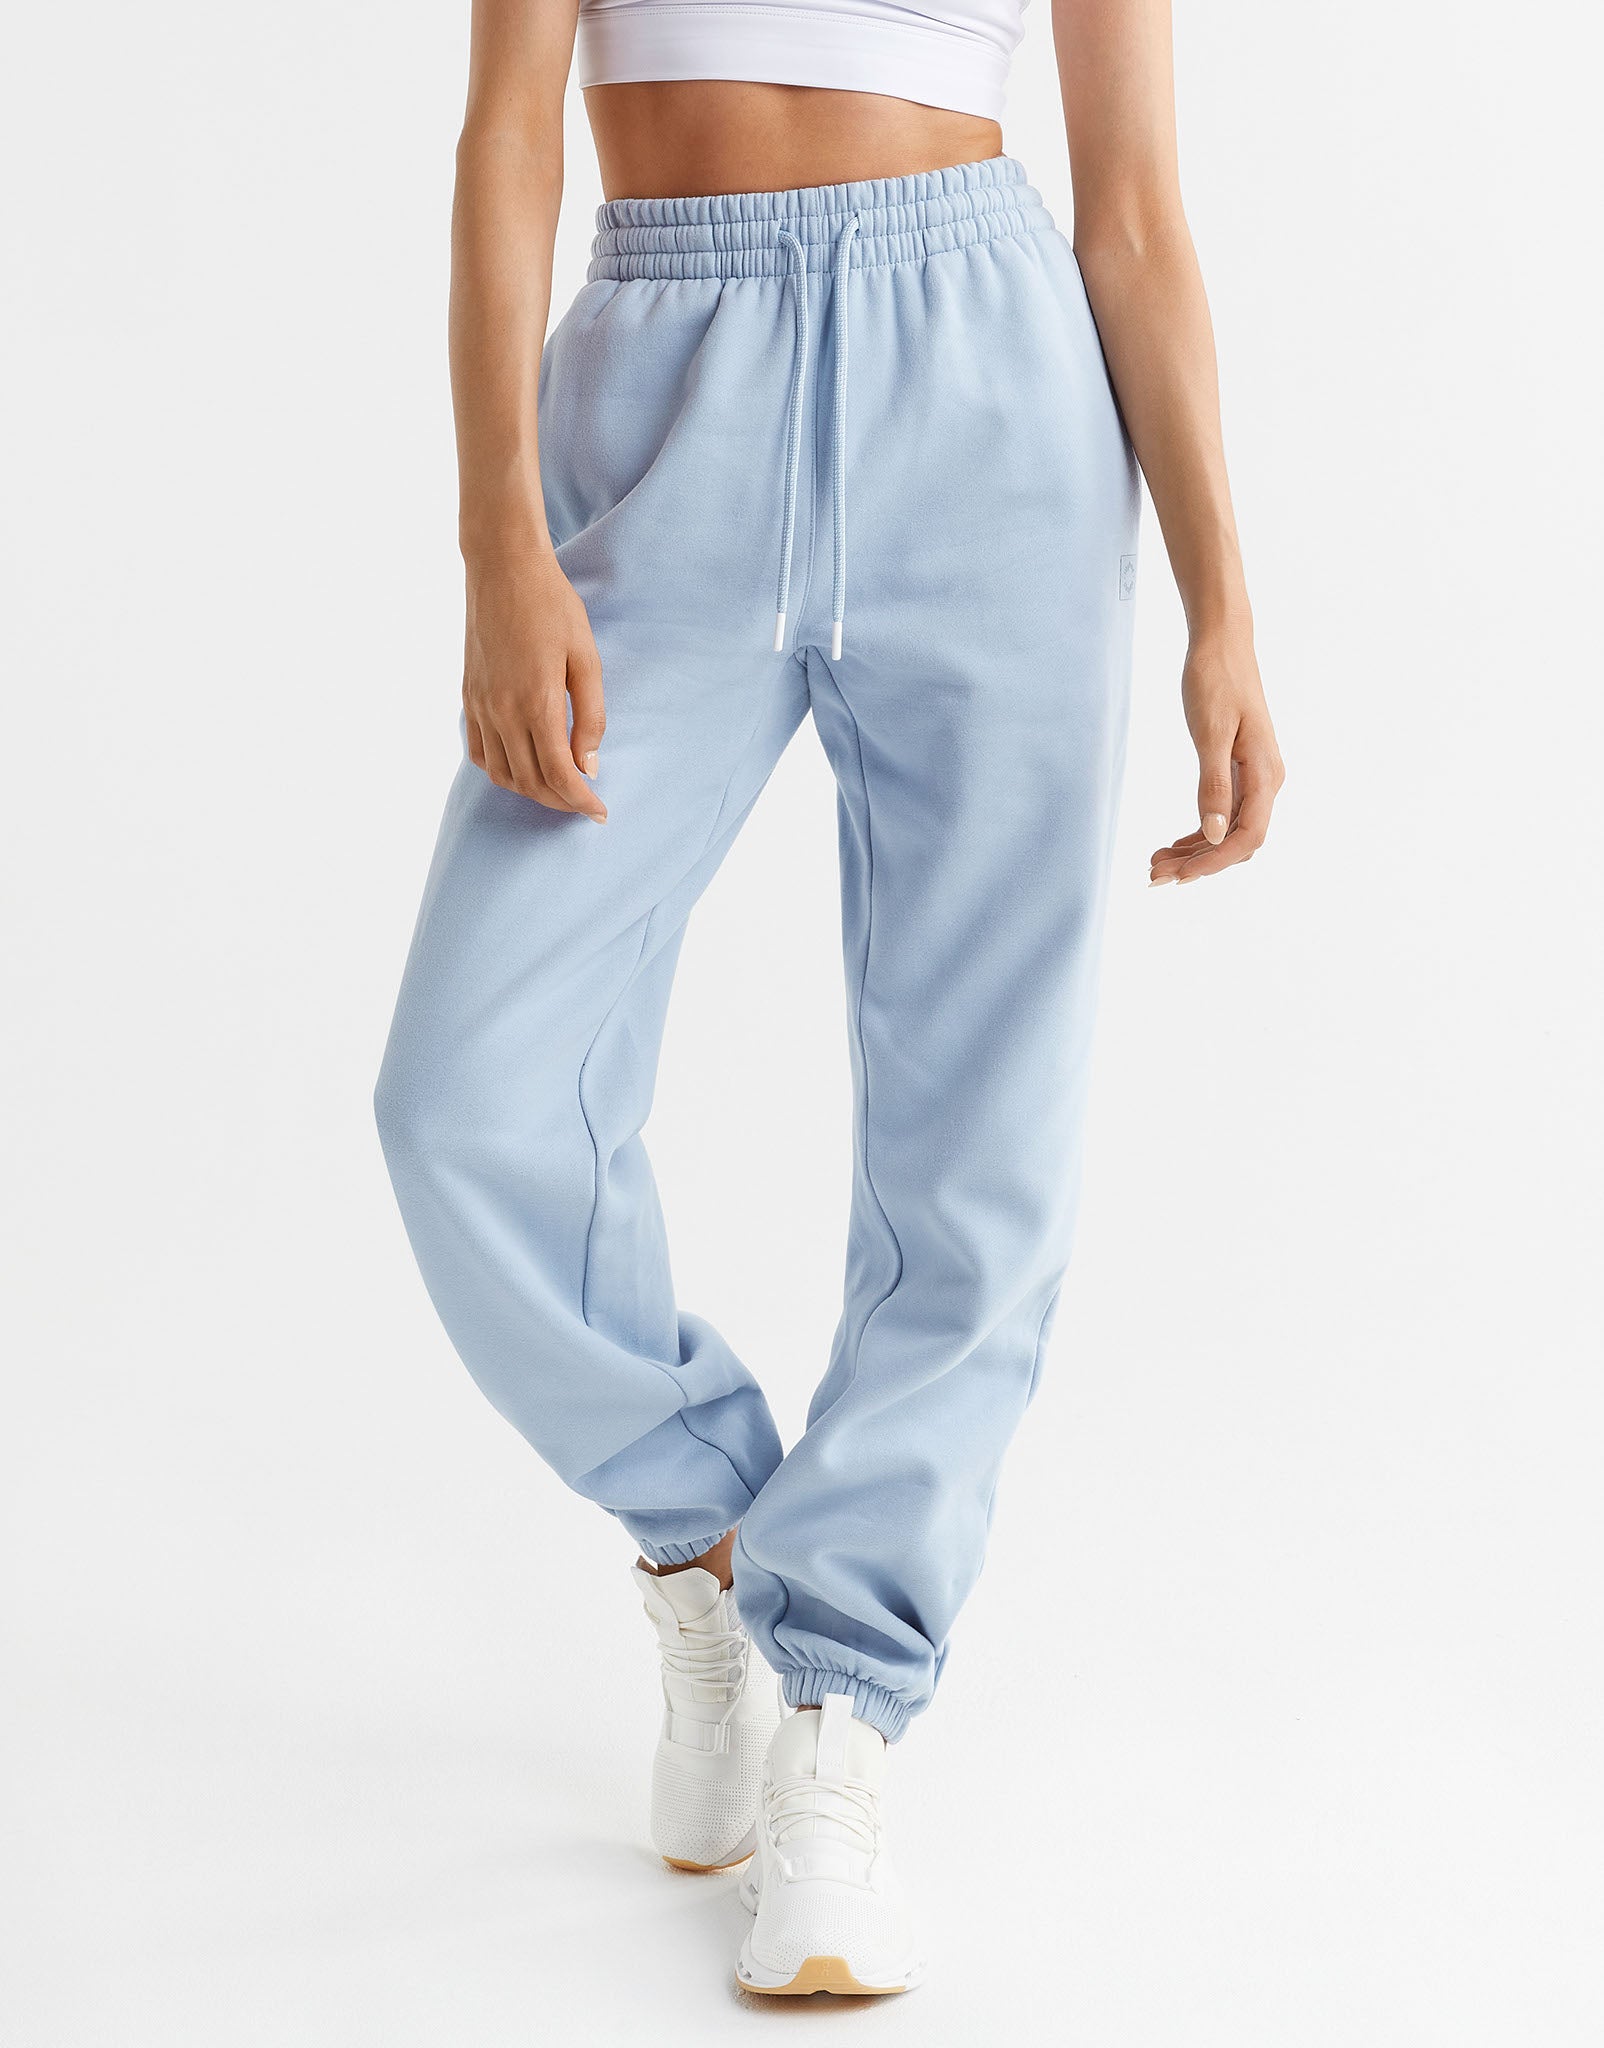 Lilybod-Lucy-Oversized-Fleece-Track-Pant-Cloud-LL89-CLD-1-New.jpeg